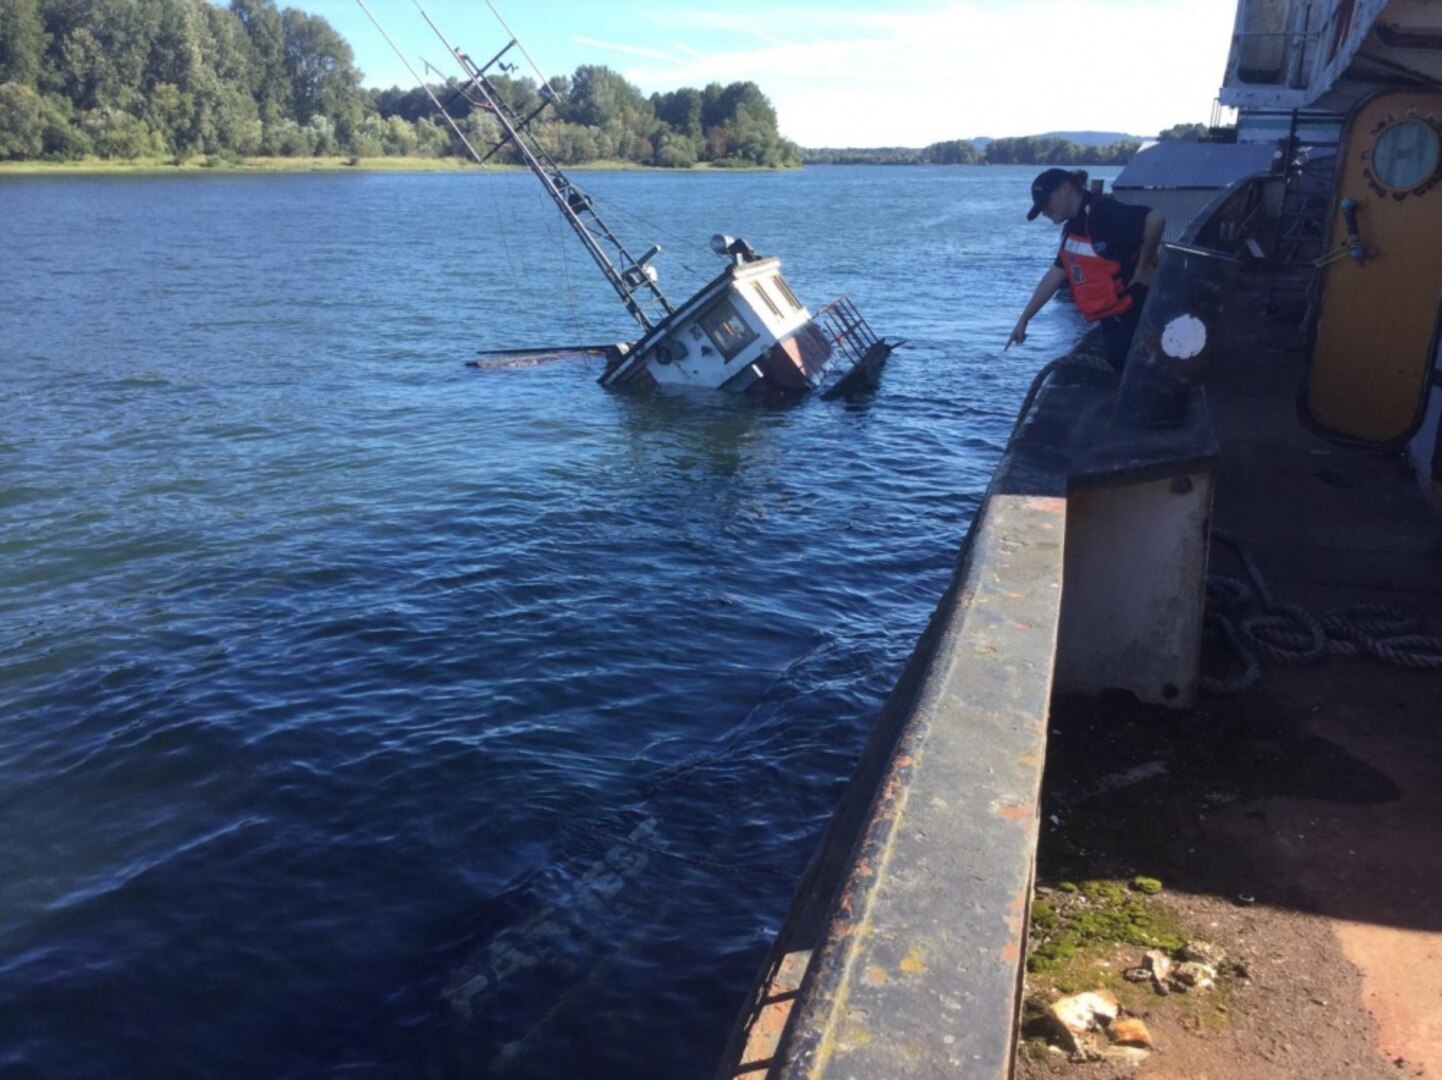 The Coast Guard Responds to a sunken tugboat.  A Marine Science Technician from Incident Management Division Detachment Portland, points to a sunken motor vessel, which sank in the Columbia River near Goble, Oregon. Personnel from the Coast Guard and several Oregon State agencies are partnering in response to the sinking. (U.S Coast Guard photo by Petty Officer 2nd Class Alisha Carr)